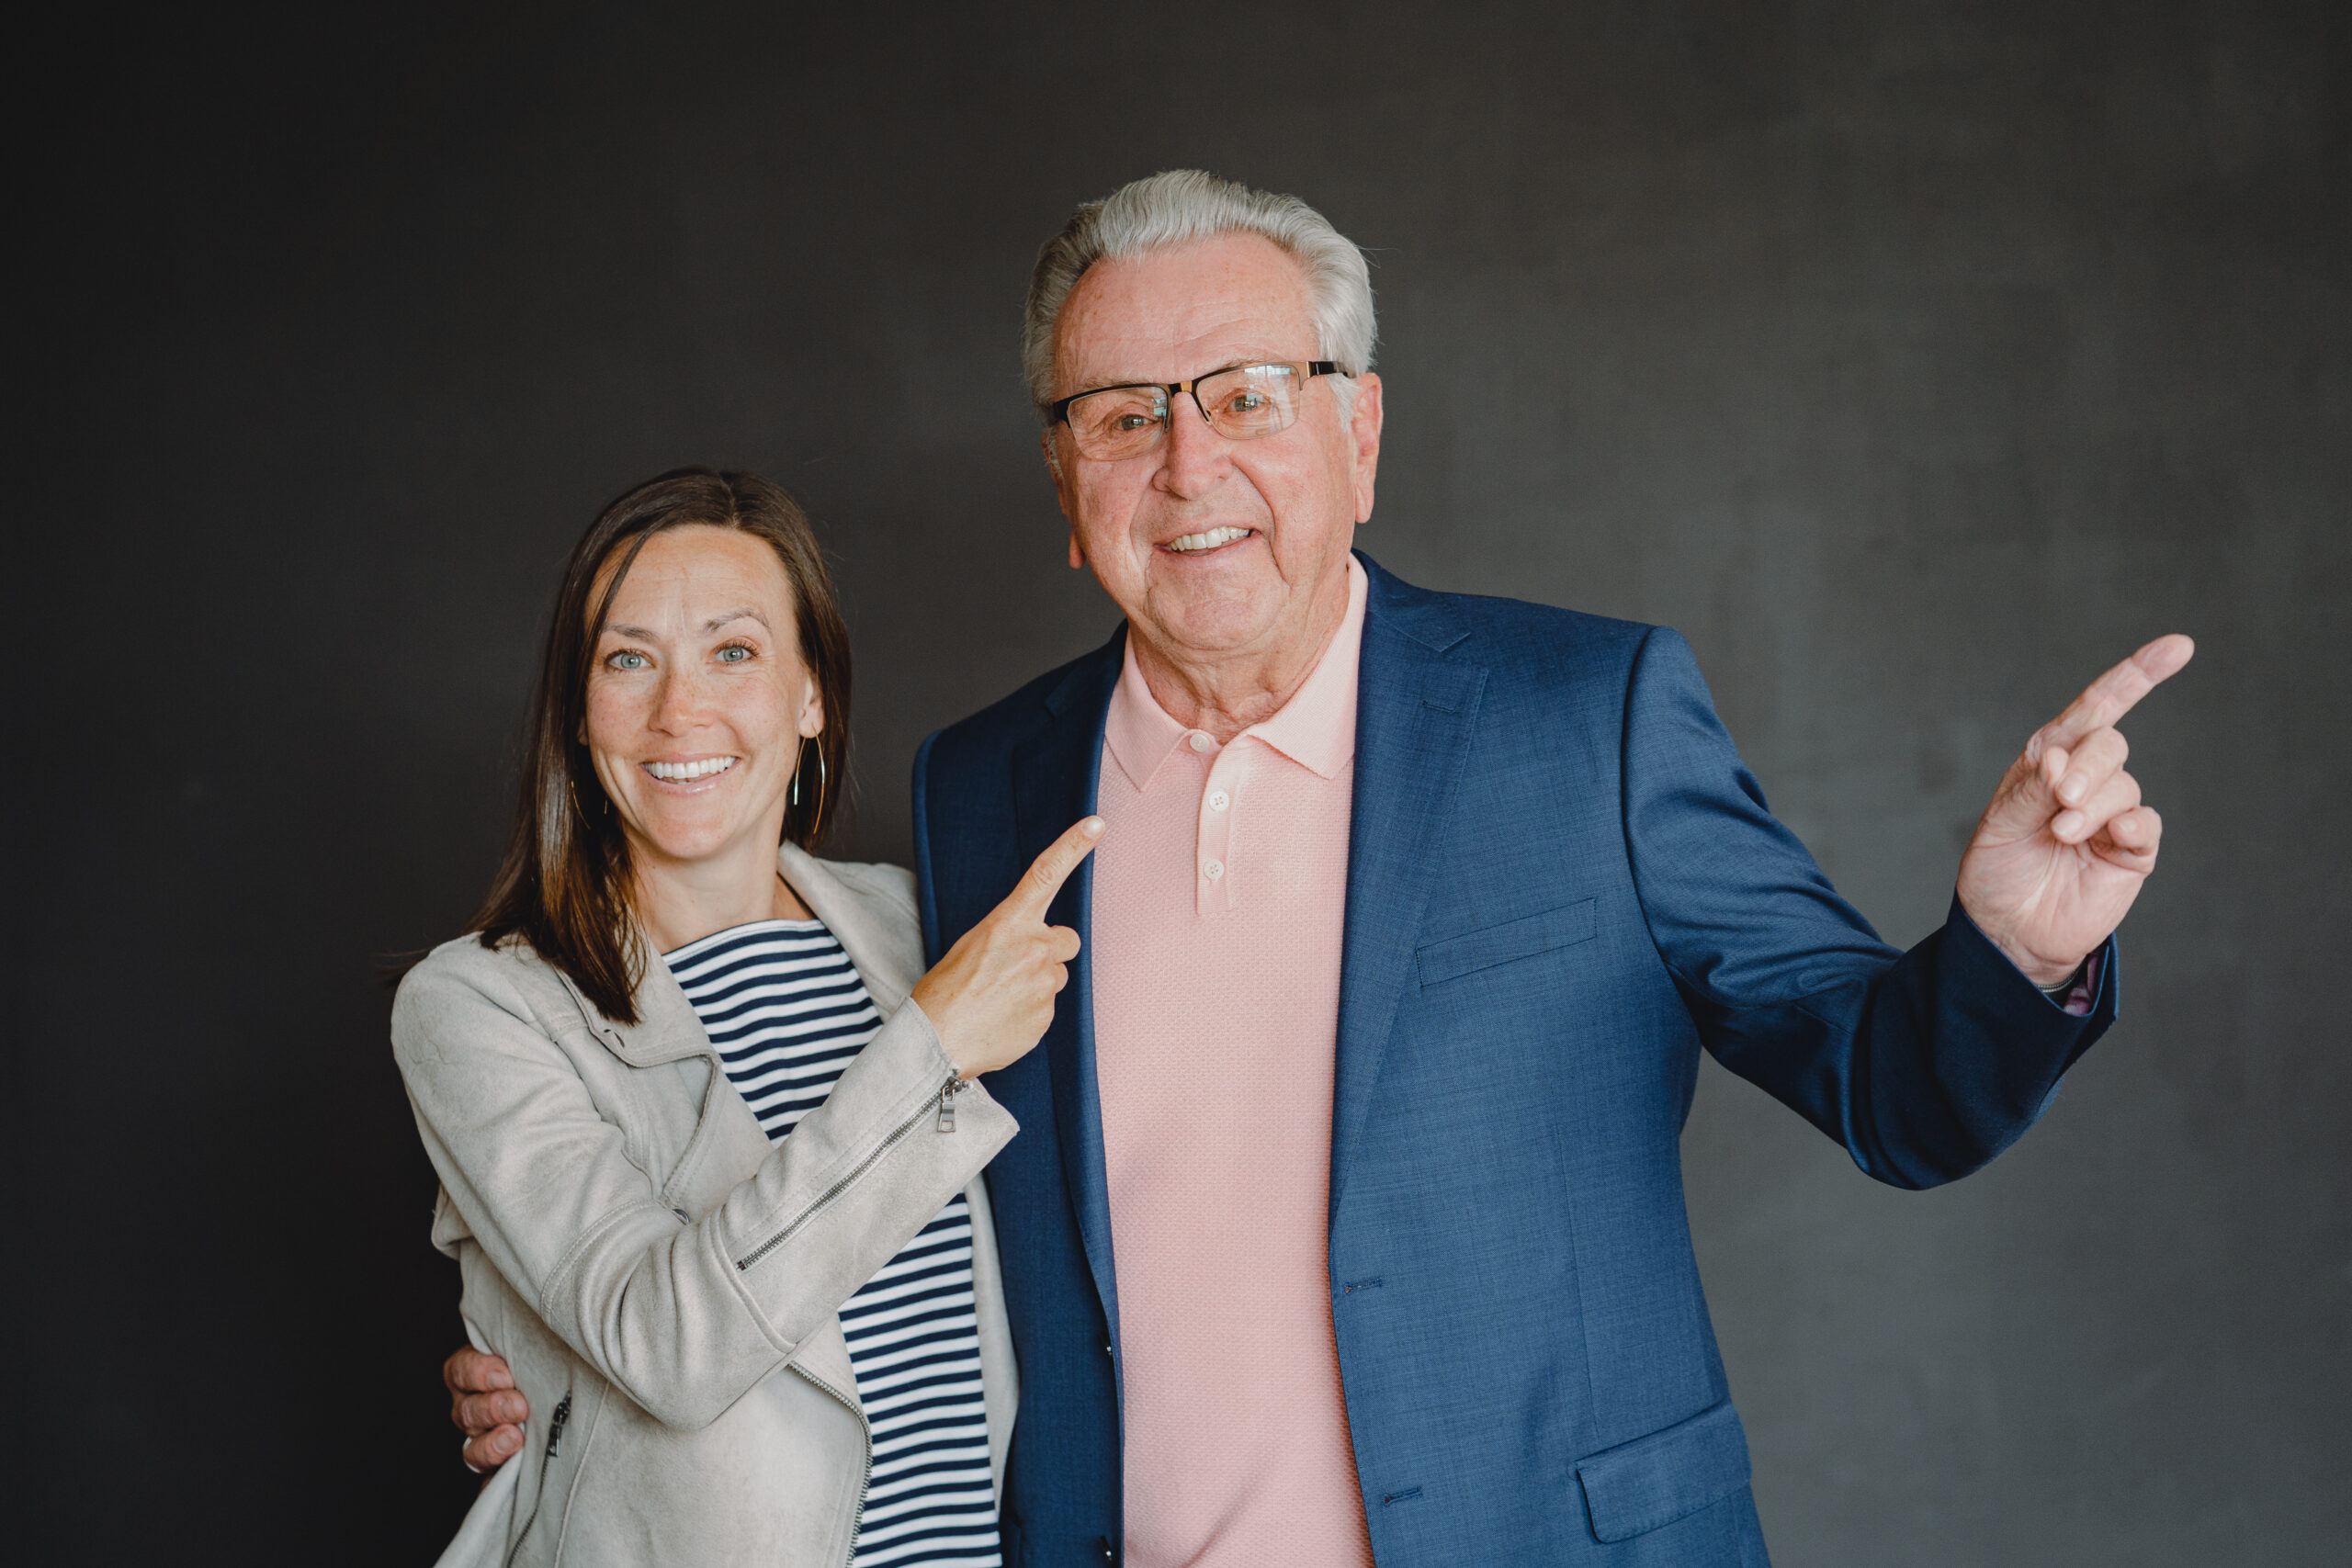 Co-founders Sara Frasca and Michael Smith pointing up and to the right to show the trajectory of how strategic planning for business can work.